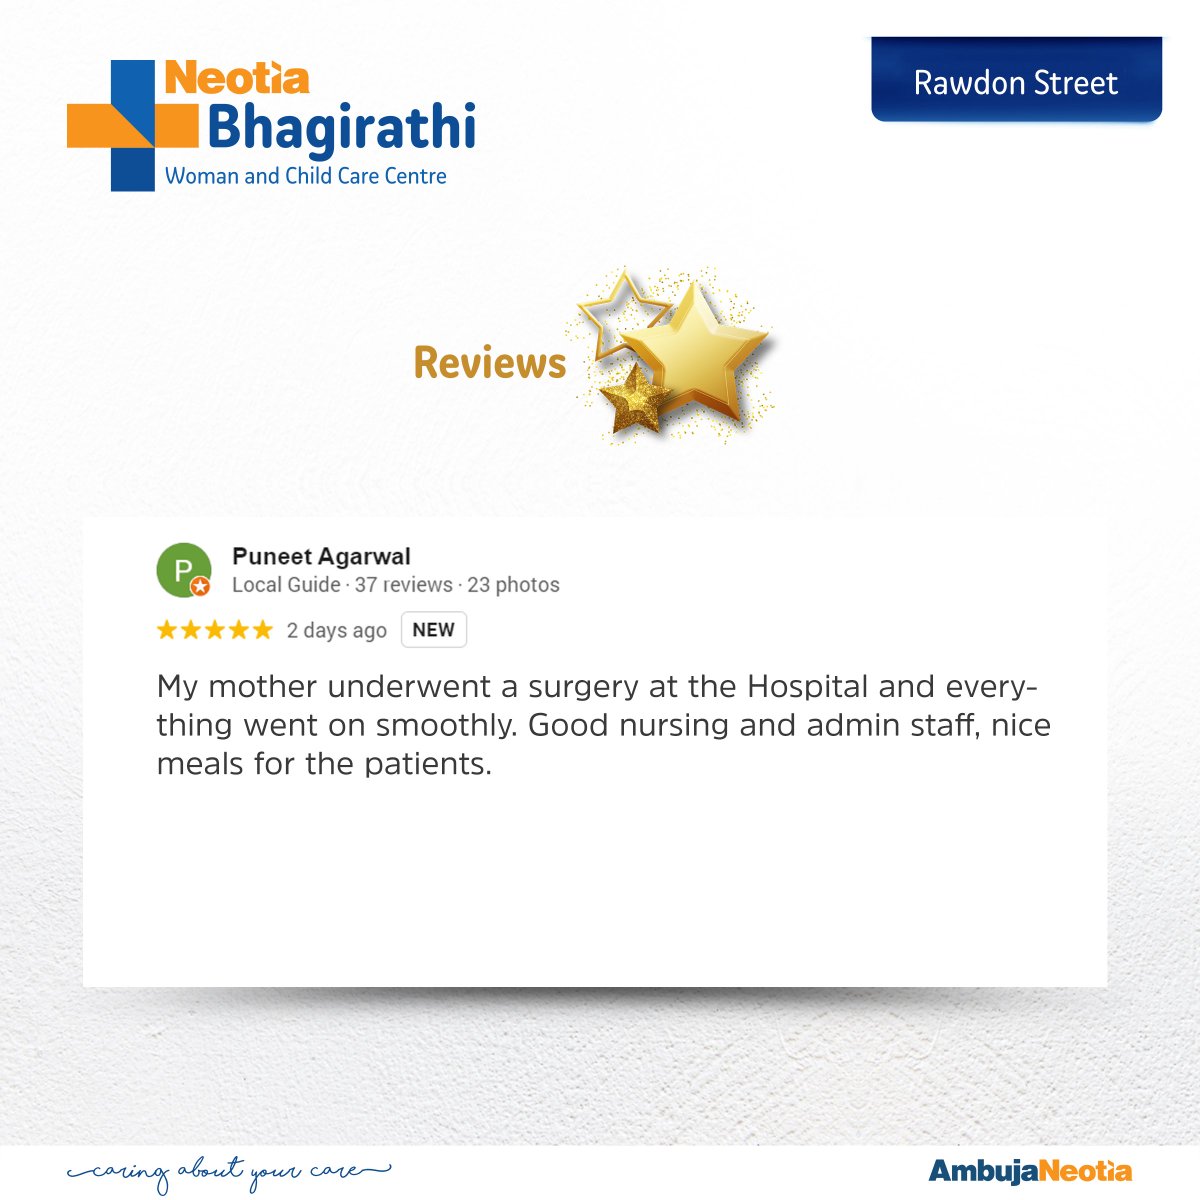 Thank you so much for your #feedback! We value your #opinion and thank you for choosing us as your #healthcare partner. Stay Healthy. Stay Safe. #testimonials #reviews #google #facebook #experience #health #healthy #caringaboutyourcare #ambujaneotia